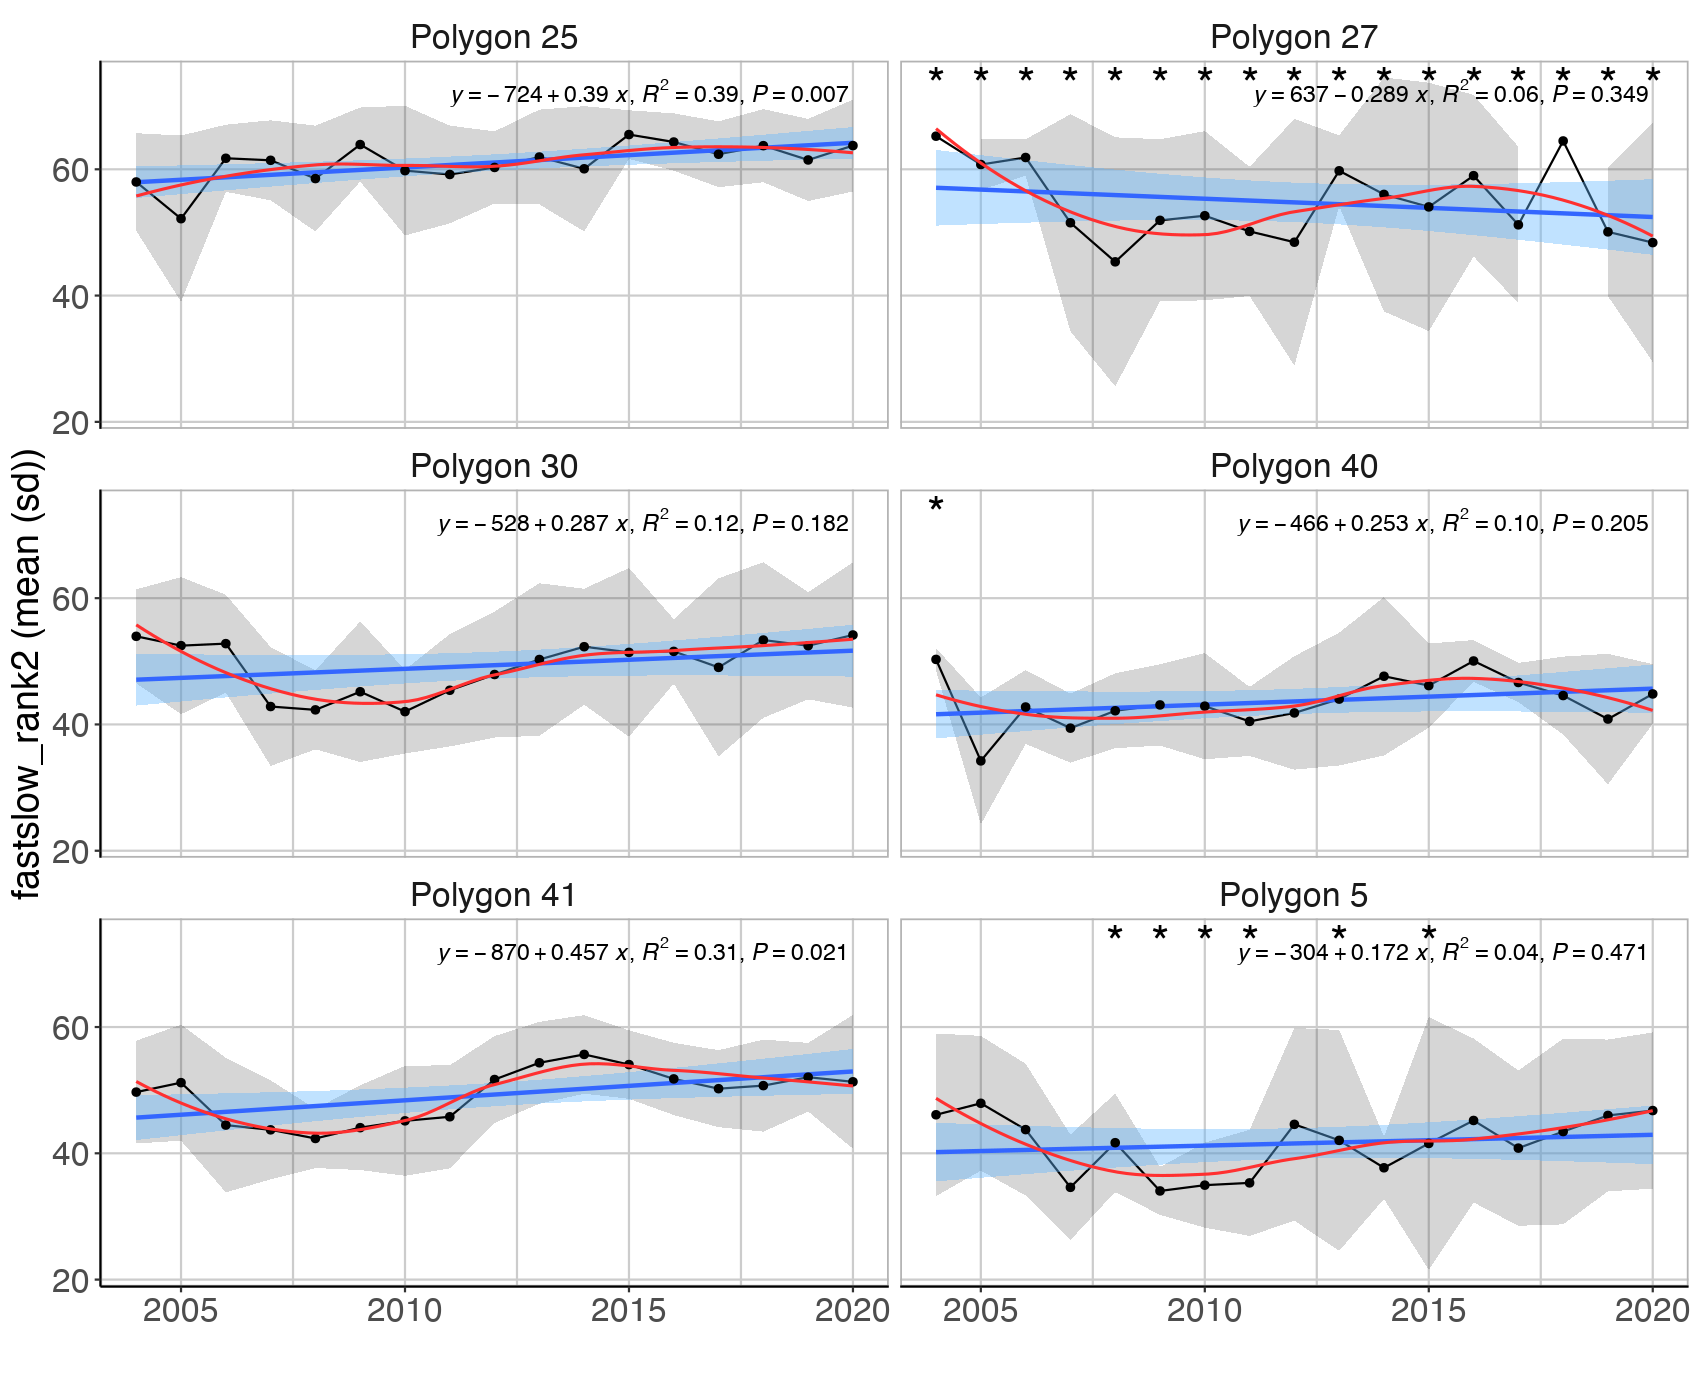 Figure S.15.2 Mean (± sd) biomass weighted fast-slow life history rank value in the Sub-Arctic part of the Barents Sea (Black dots and grey shading). High values translate to slow life history strategy. Linear regression fit with 95% CI is shown in blue, and the statistical results are given in the top of each plot. A local smoother is added in red to assist visual interpretation of non-linear changes during the period. Stars denote years with low sample size (< 5 trawls).